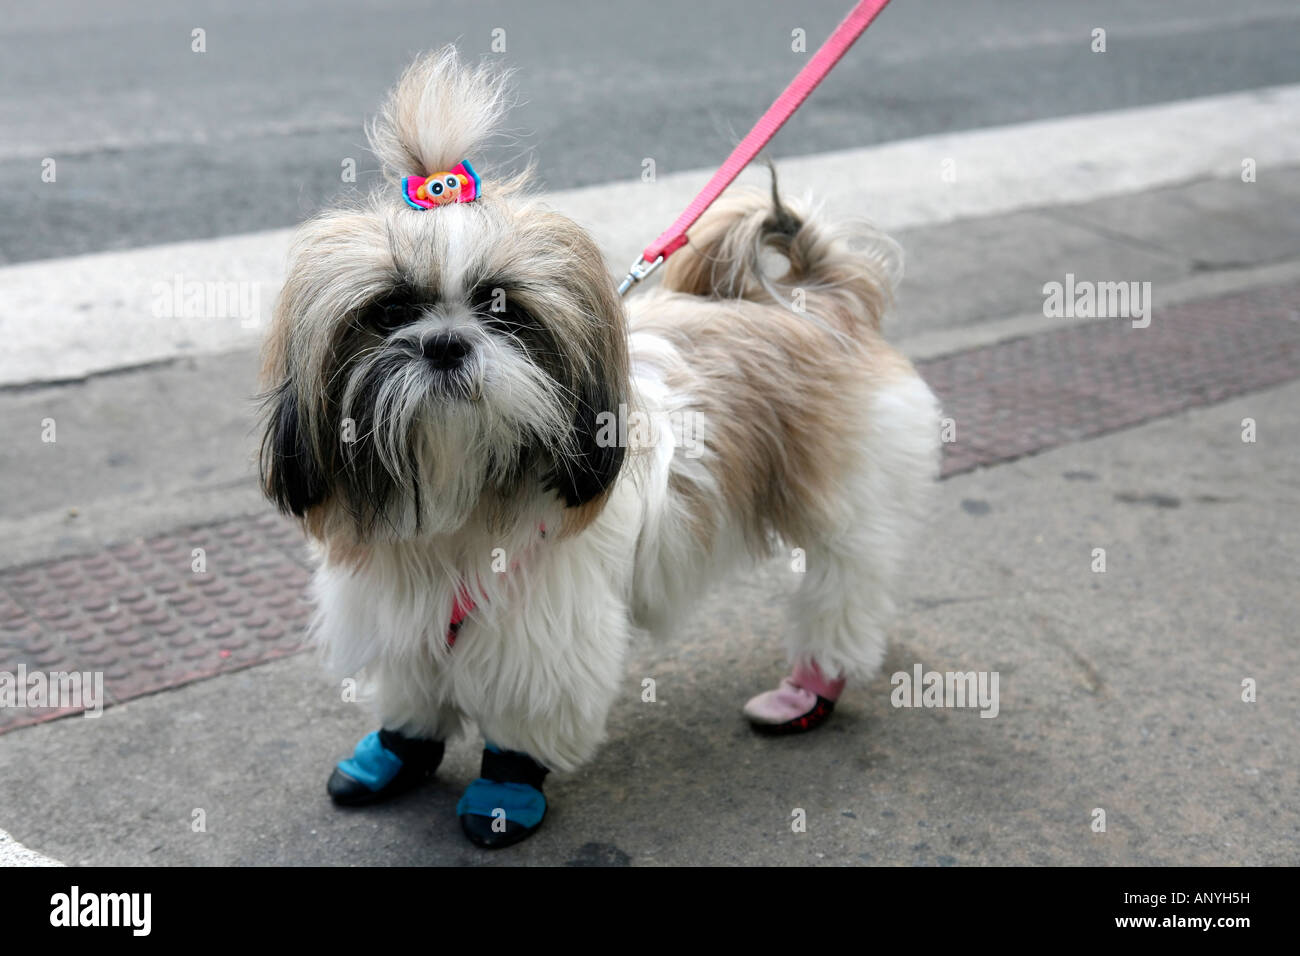 cute and funny Shih Tzu or Lhasa Apso with little blue and pink slipper Stock Photo